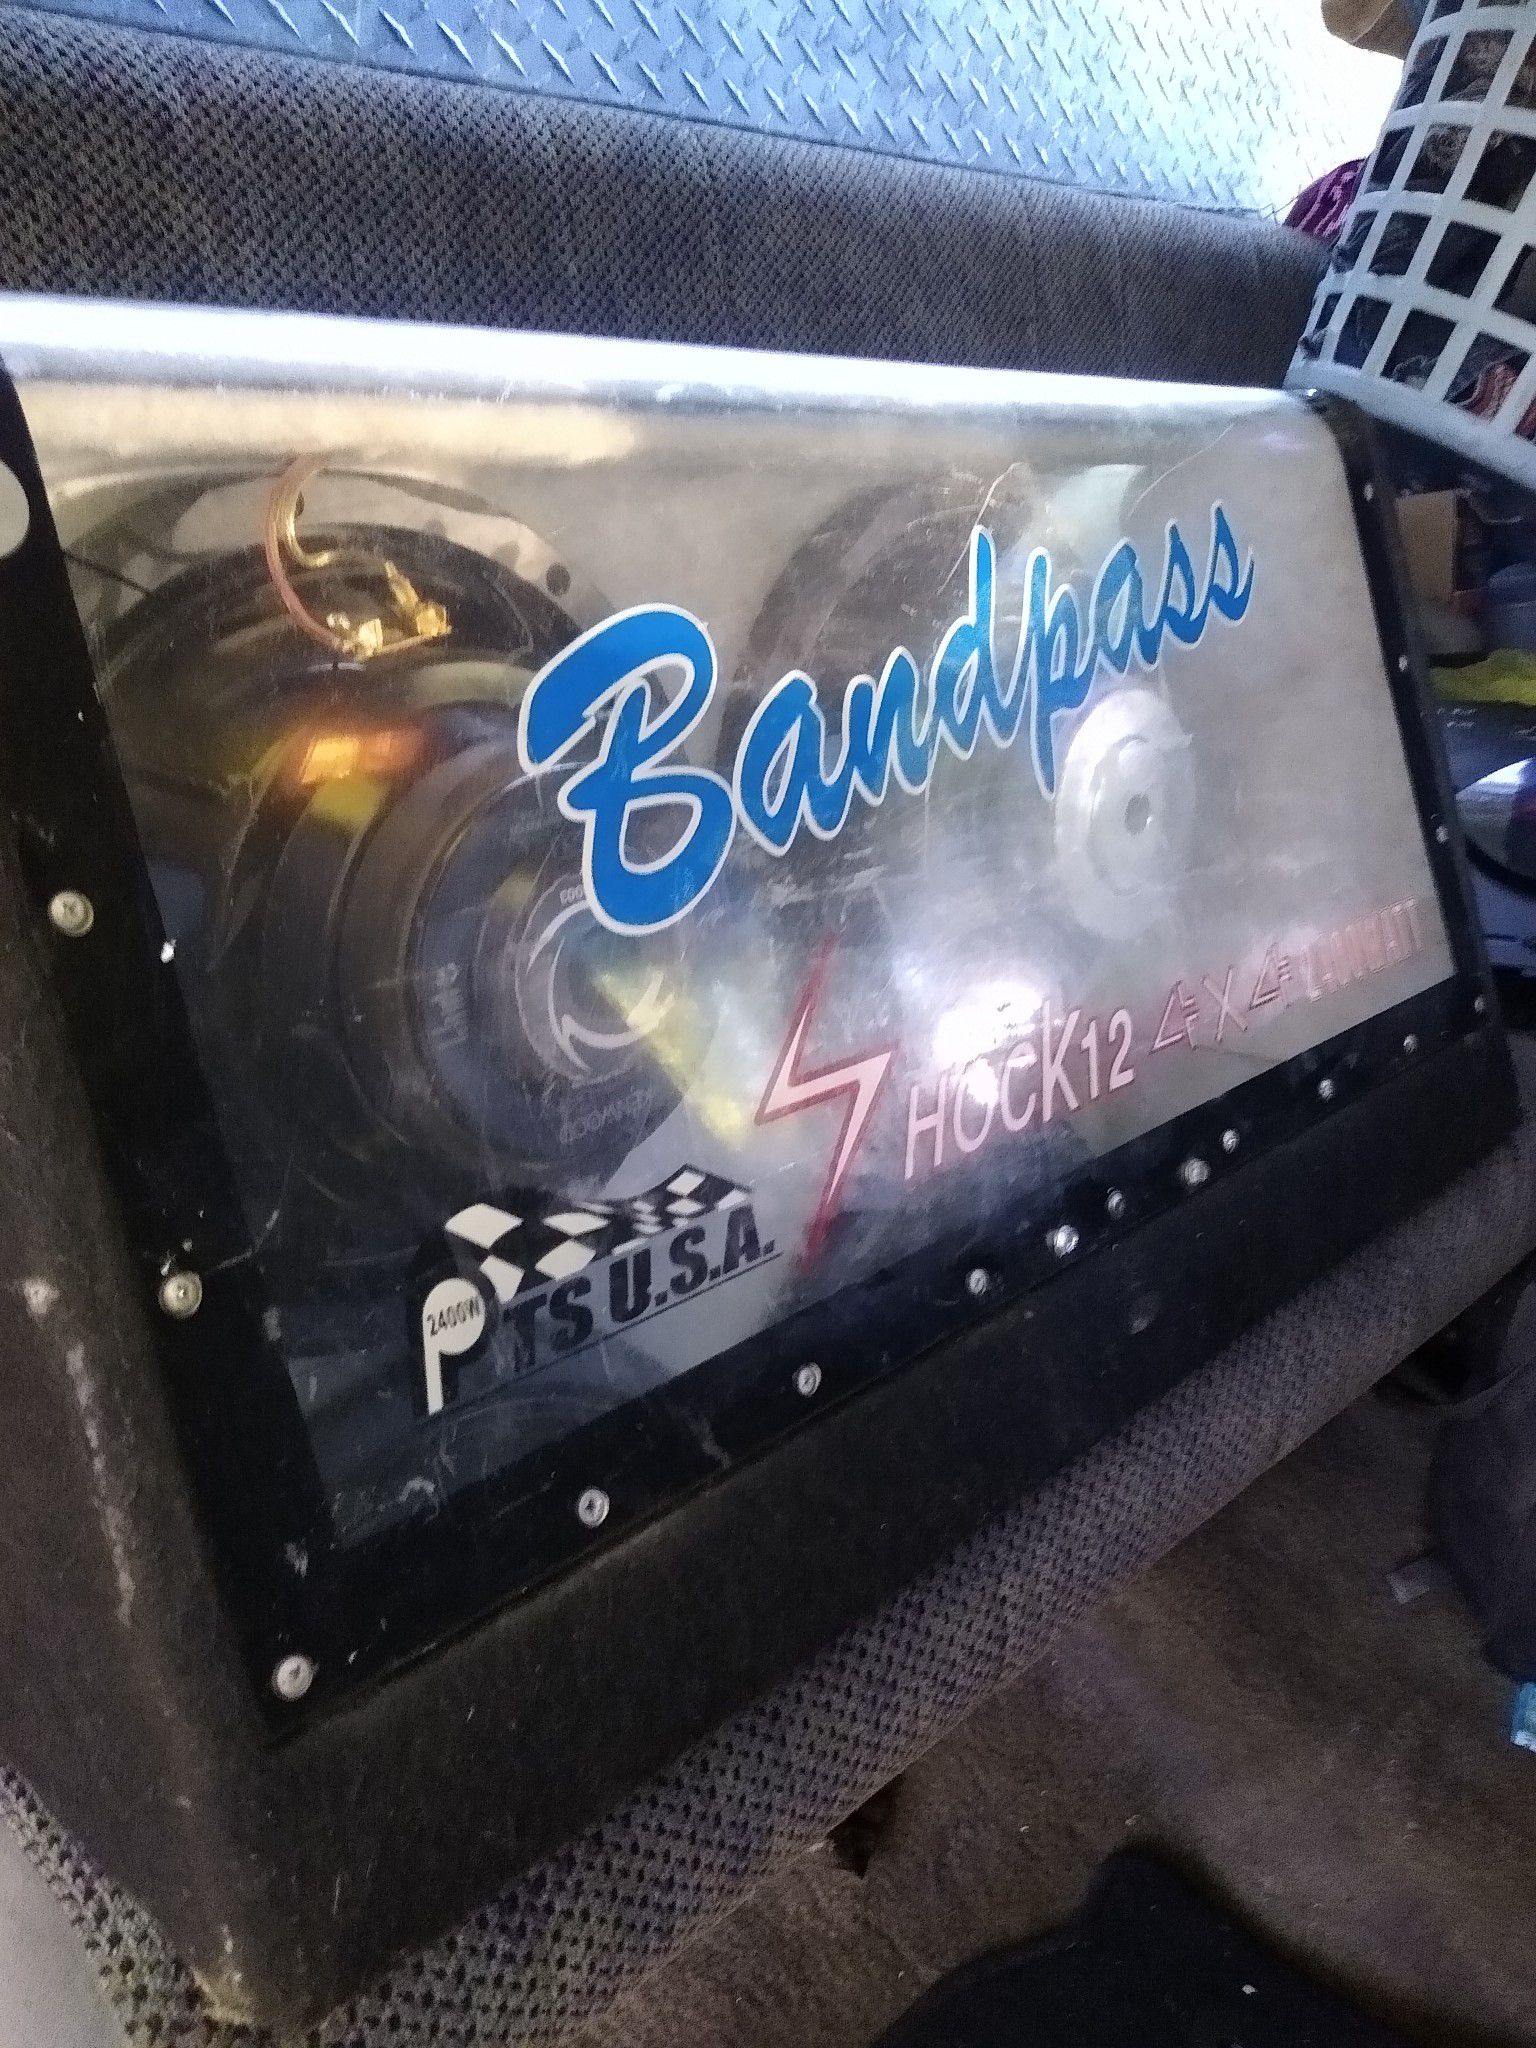 Bandpass sub speaker box for 12s or 10s. Set up for 12s. NO SPEAKERS INCLUDED. CAN INCLUDE 2 700 WATT FIR $150 TOTAL